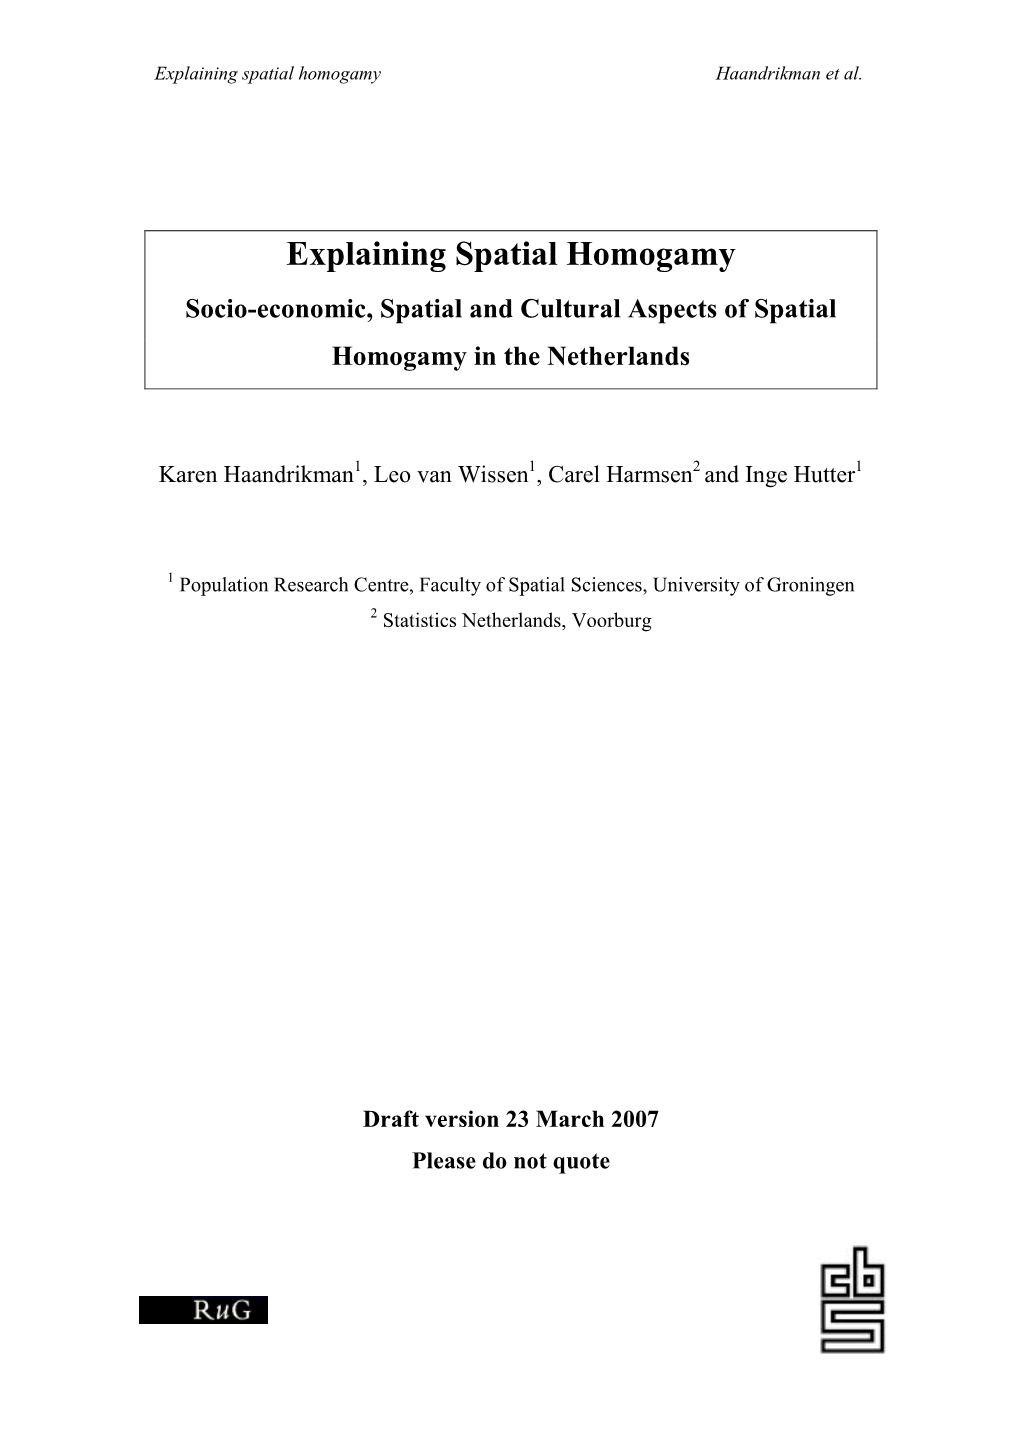 Paper Aims to Explain Spatial Variation in Spatial Homogamy by Means of a Spatial Regression